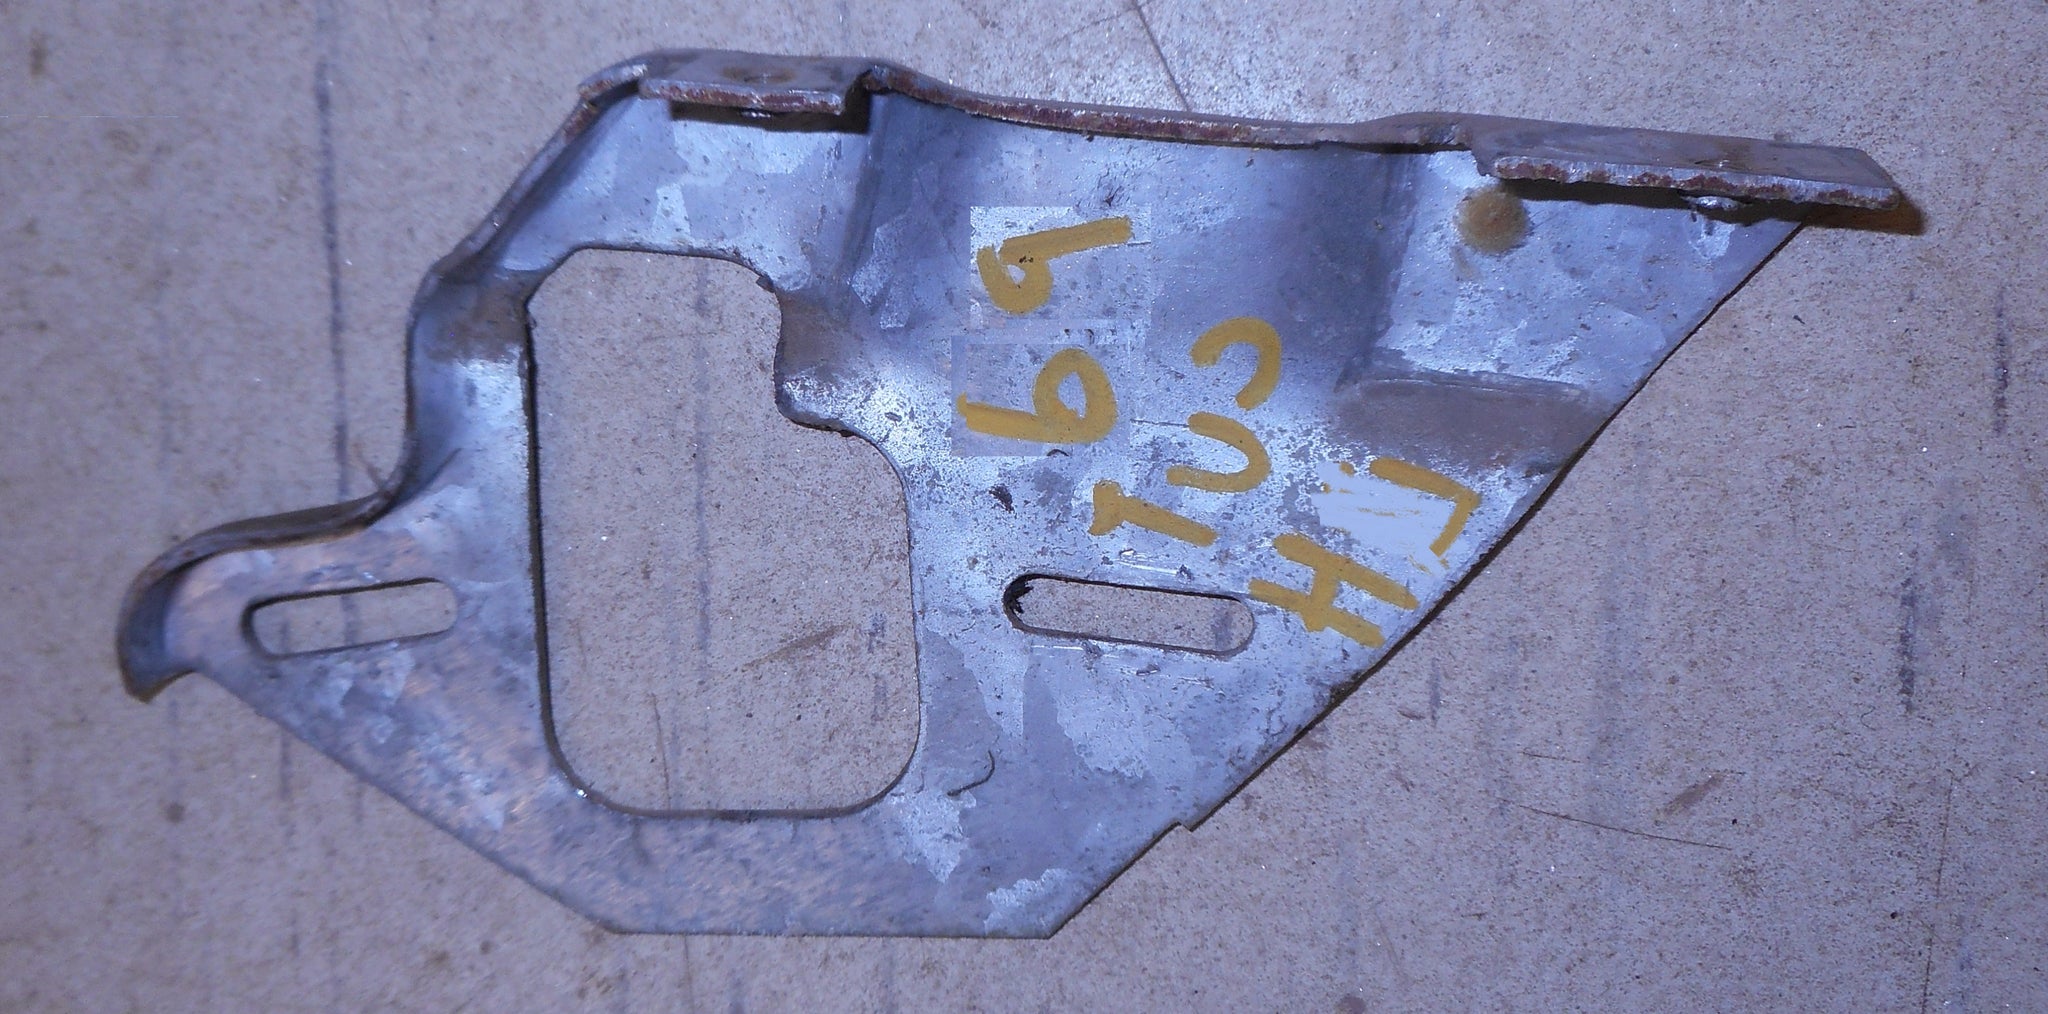 DOOR GLASS REAR TRACK SUPPORT, LEFT, USED, 69 A-BODY